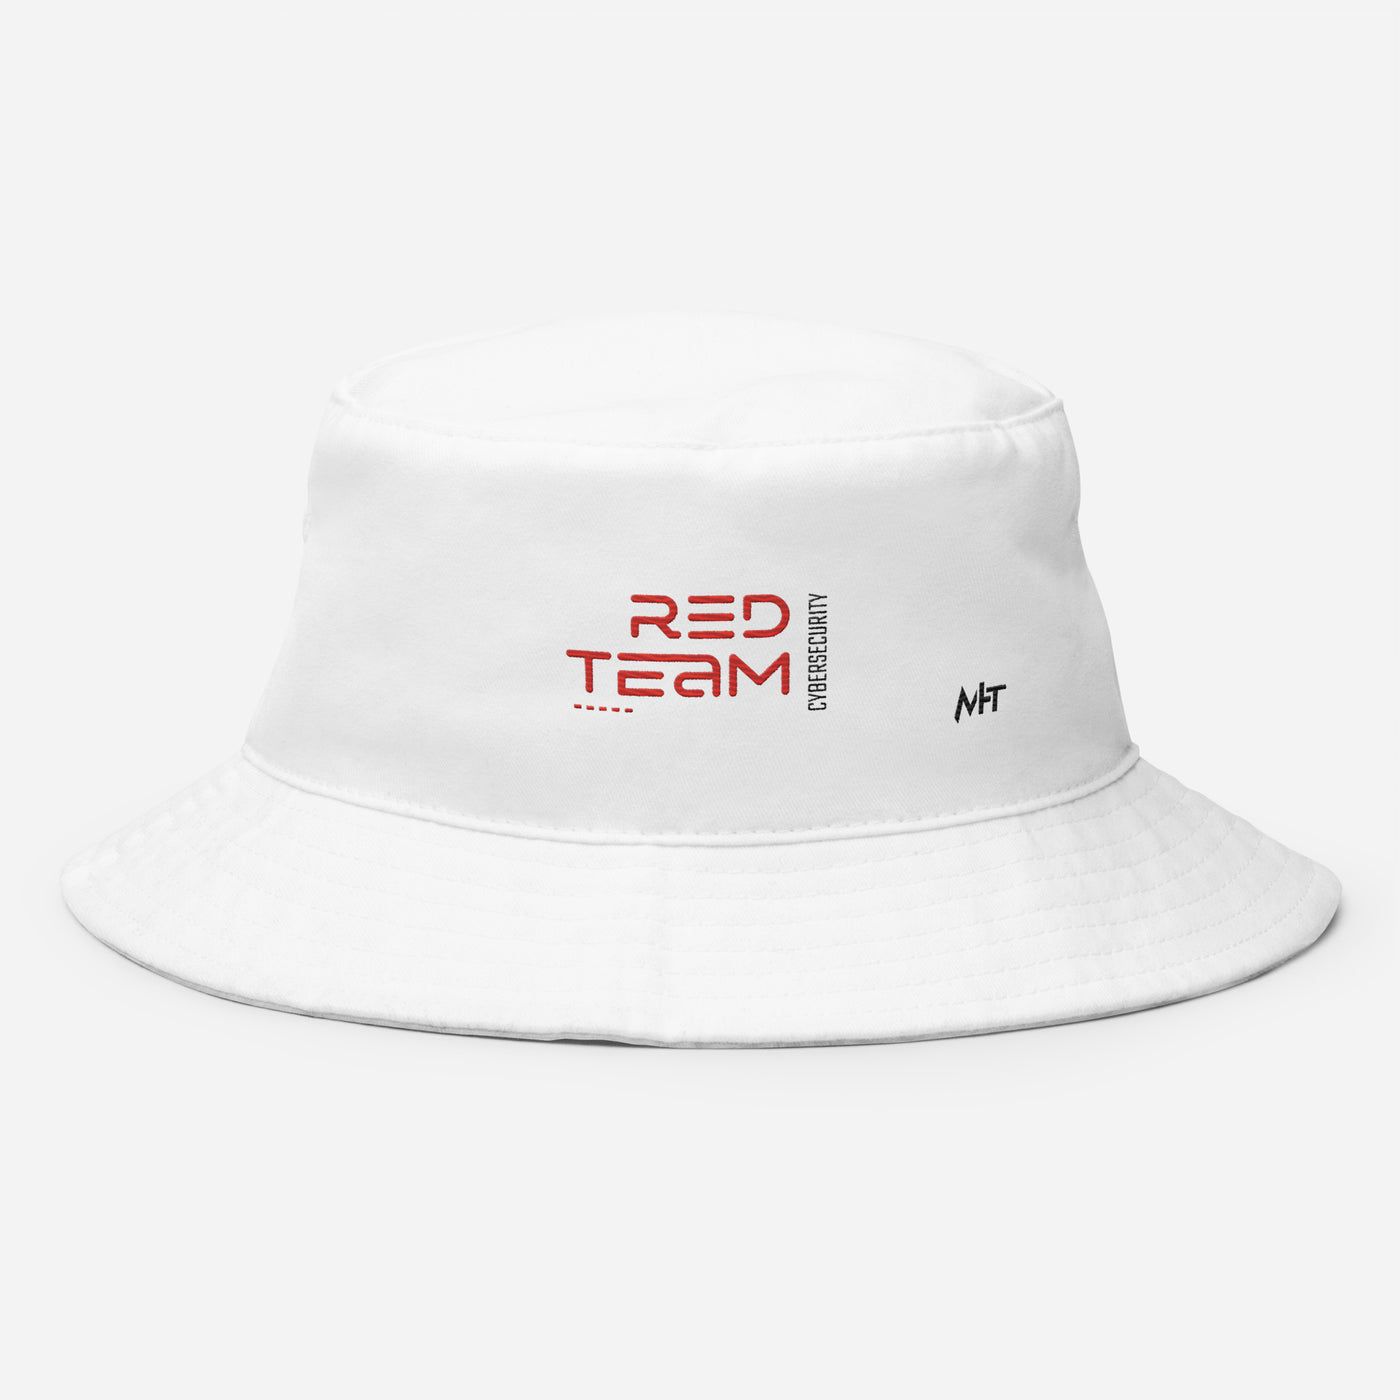 Cyber Security Red Team V11 - Bucket Hat